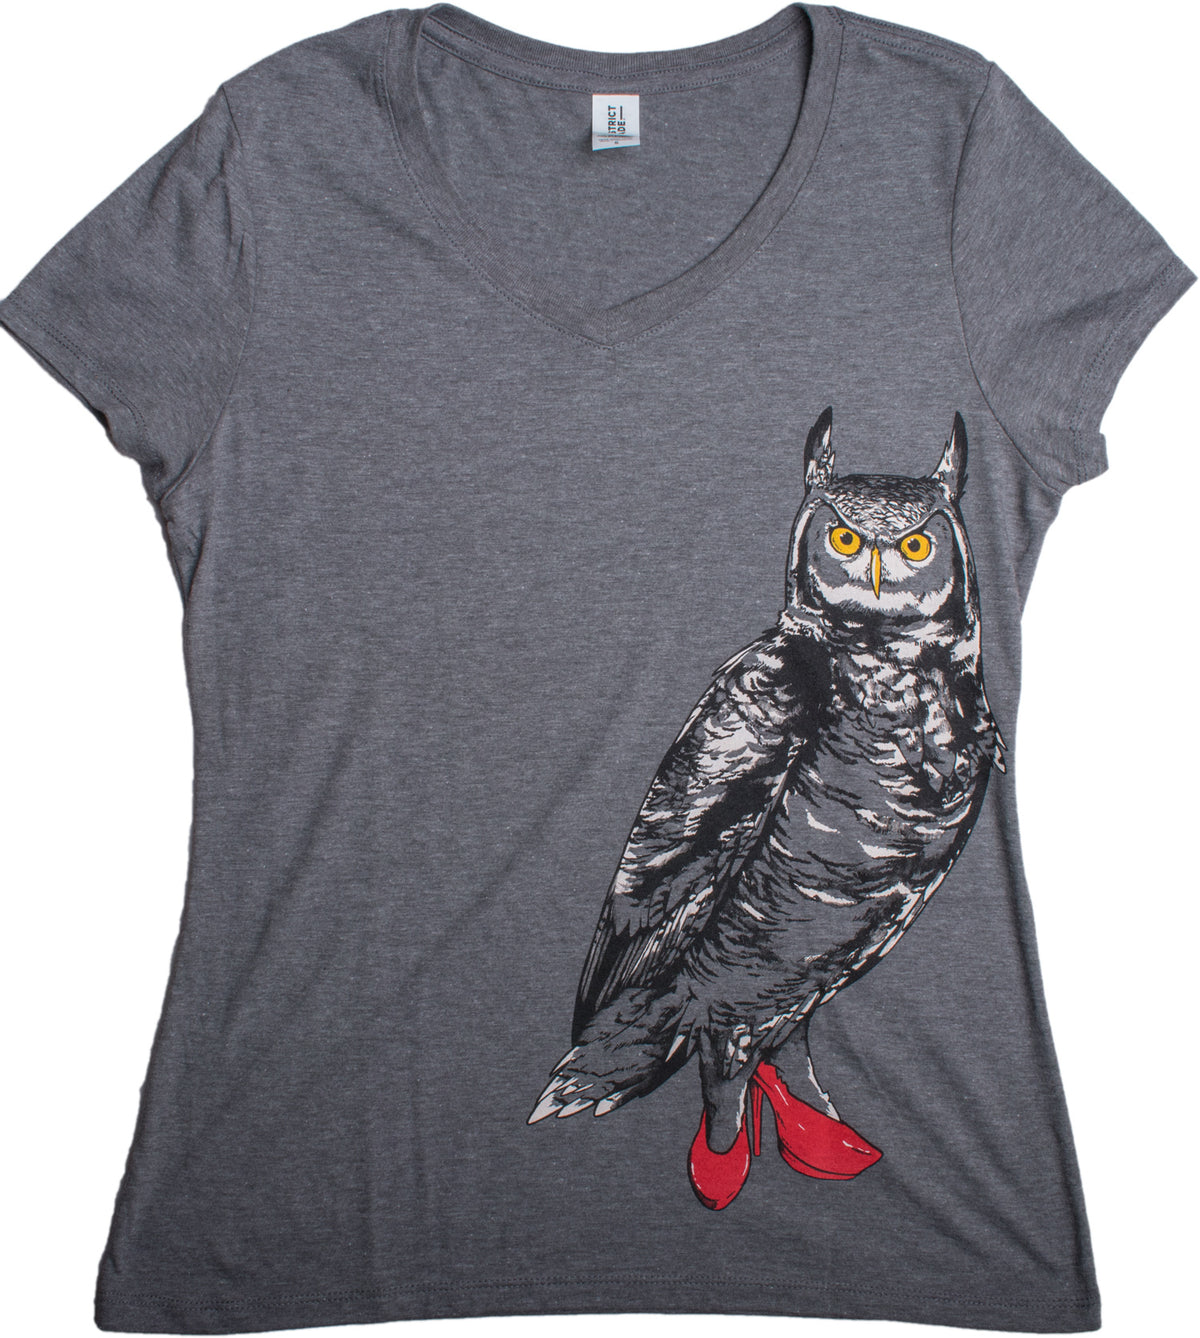 Owl in Pumps | Cute Funny Bird Nature Shoe Humor Comfy V-neck T-shirt for Women